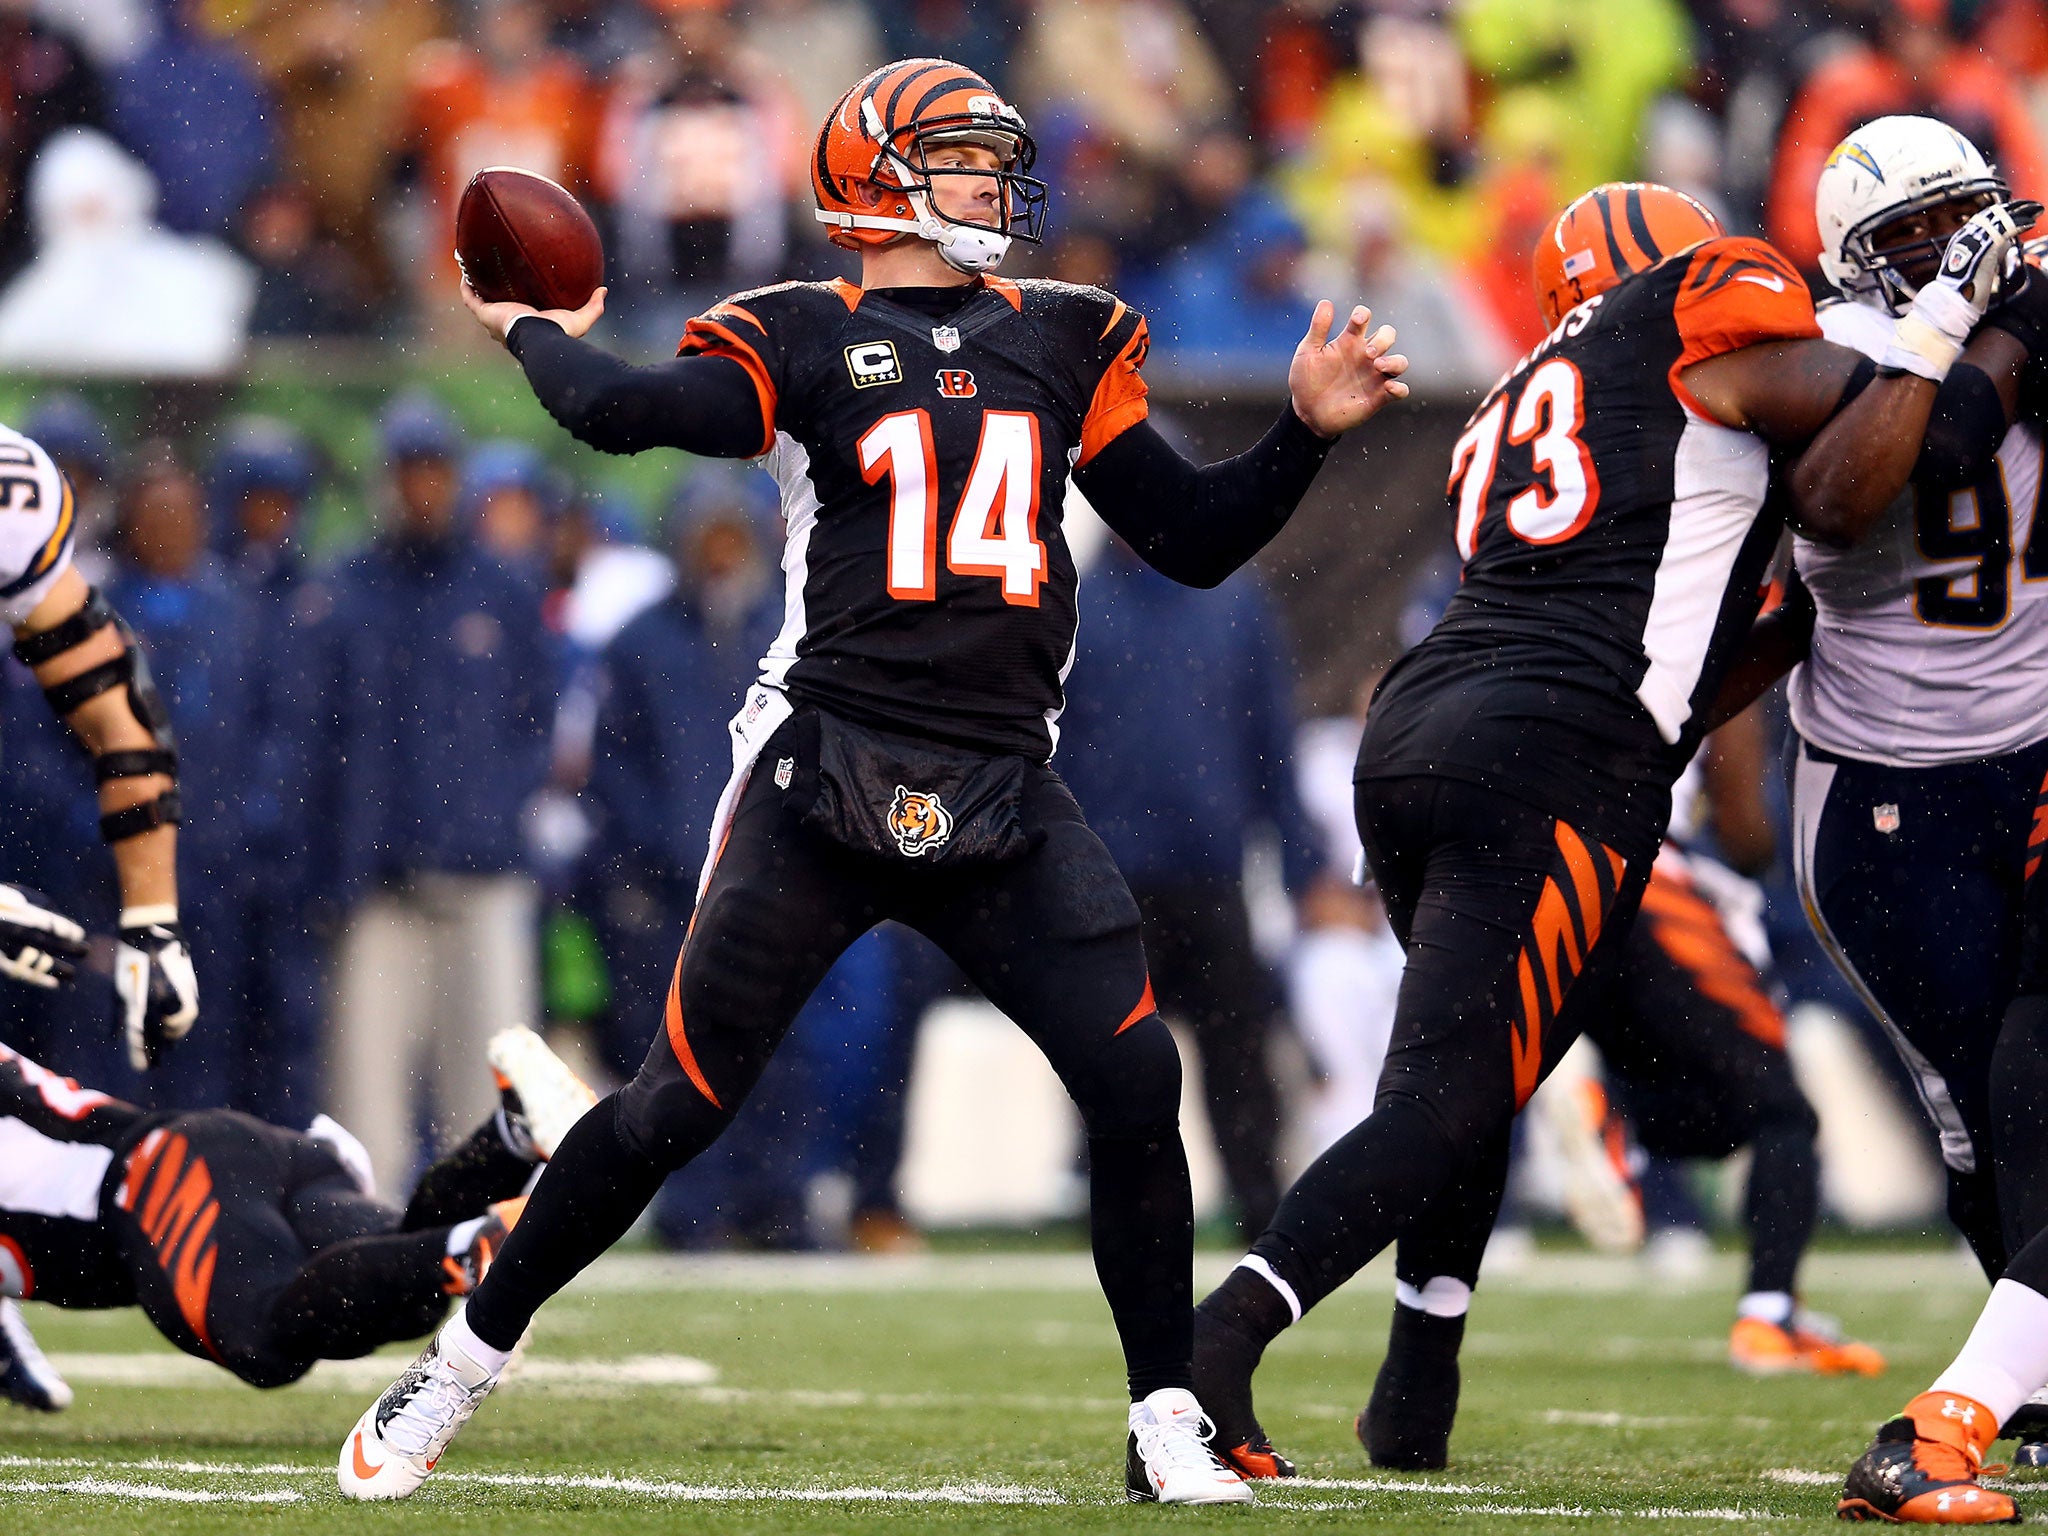 The Cincinnati Bengals have handed Andy Dalton a six-year, $115m contract extension